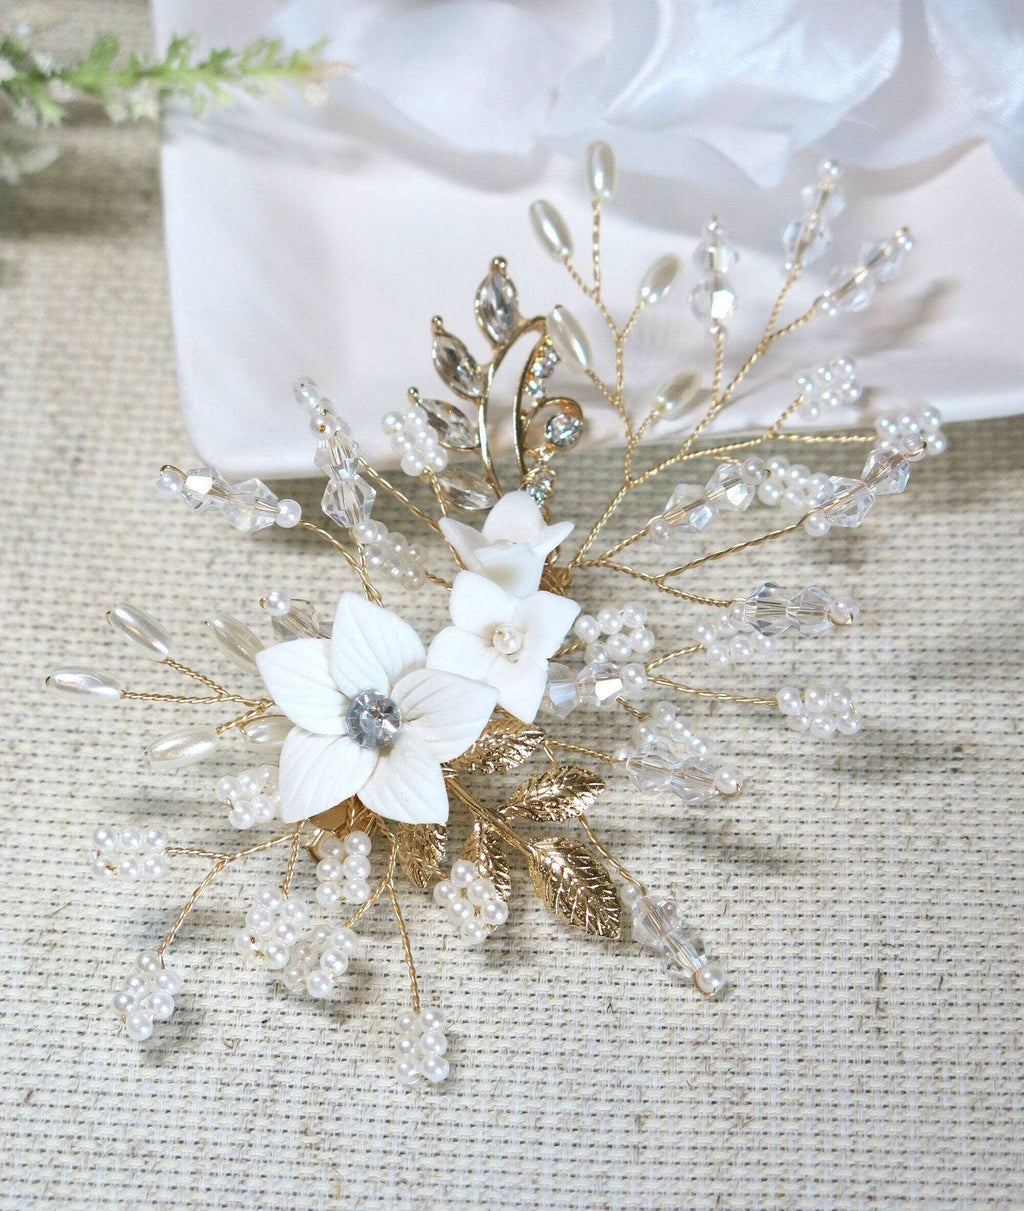 Ceramic Flower Oval Pearl Wire Hairclip, White Clay Flower Bridal Hair Clip, Wedding Crystal Bead Wire Floral Alligator Hairclip Hairpiece - KaleaBoutique.com